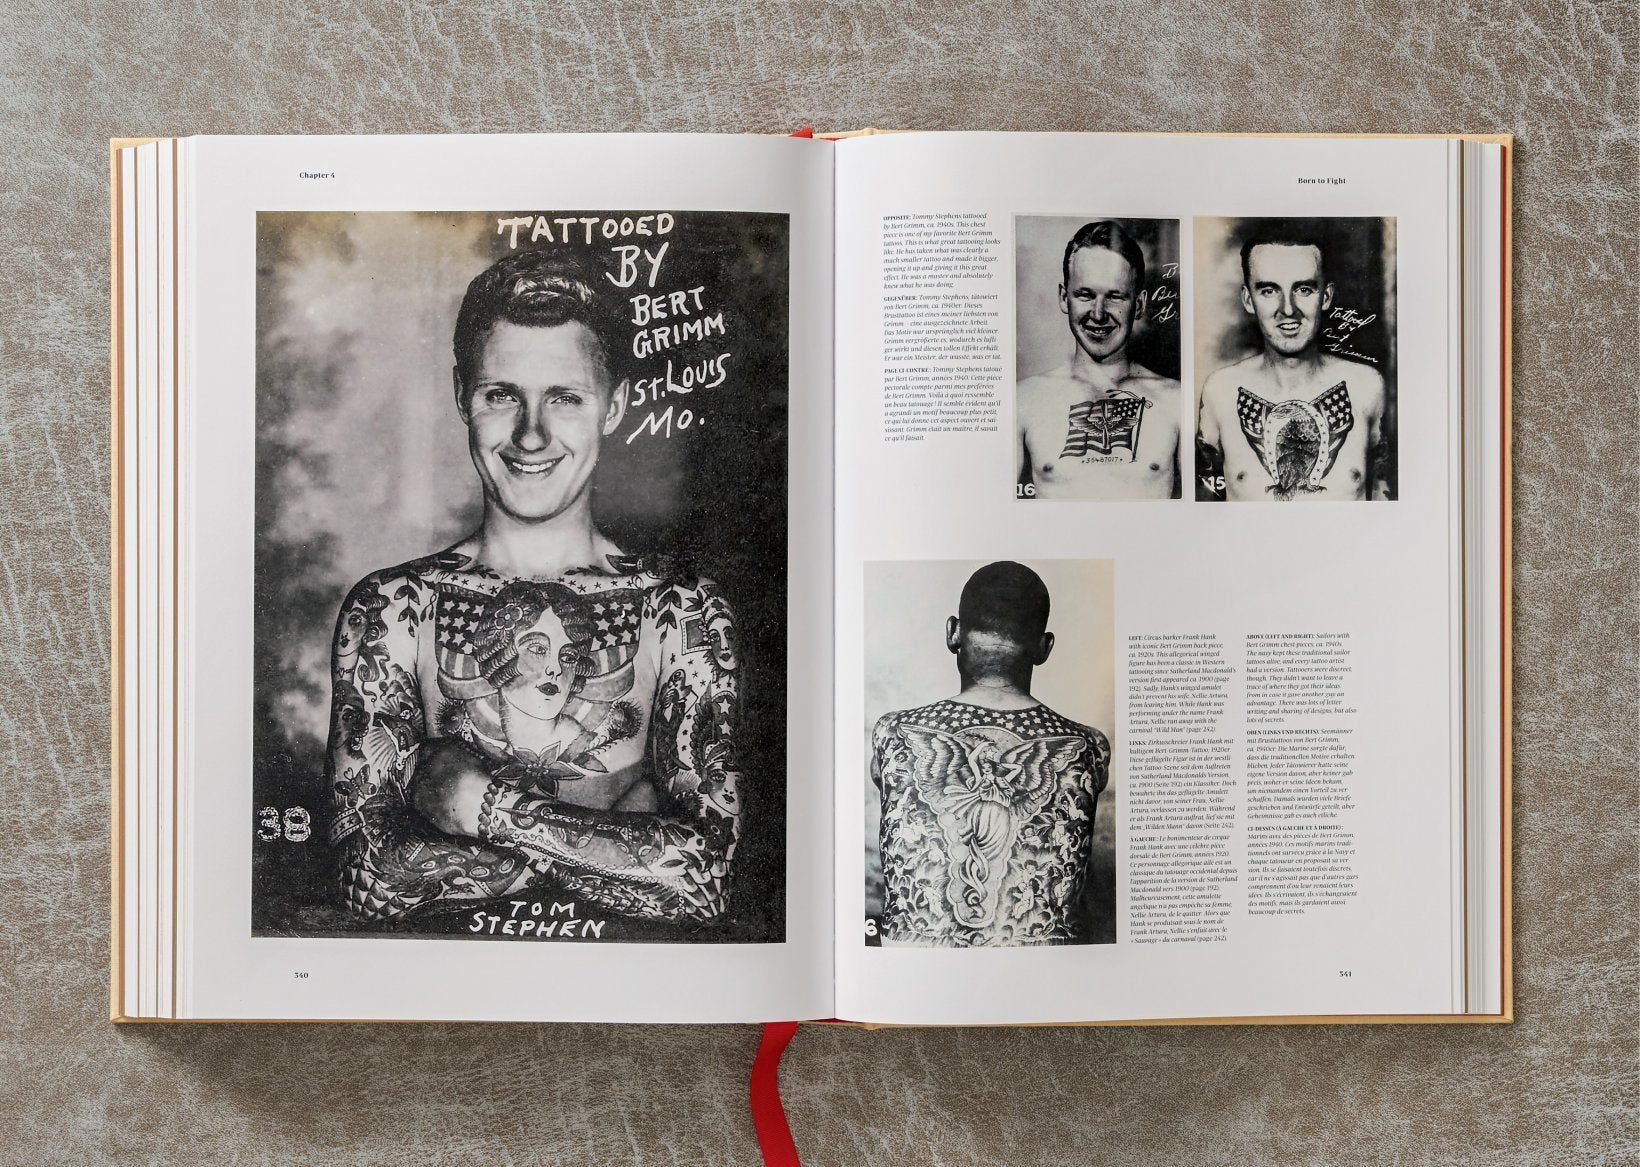 TATTOO. 1730s-1970s. Henk Schiffmacher's Private Collection